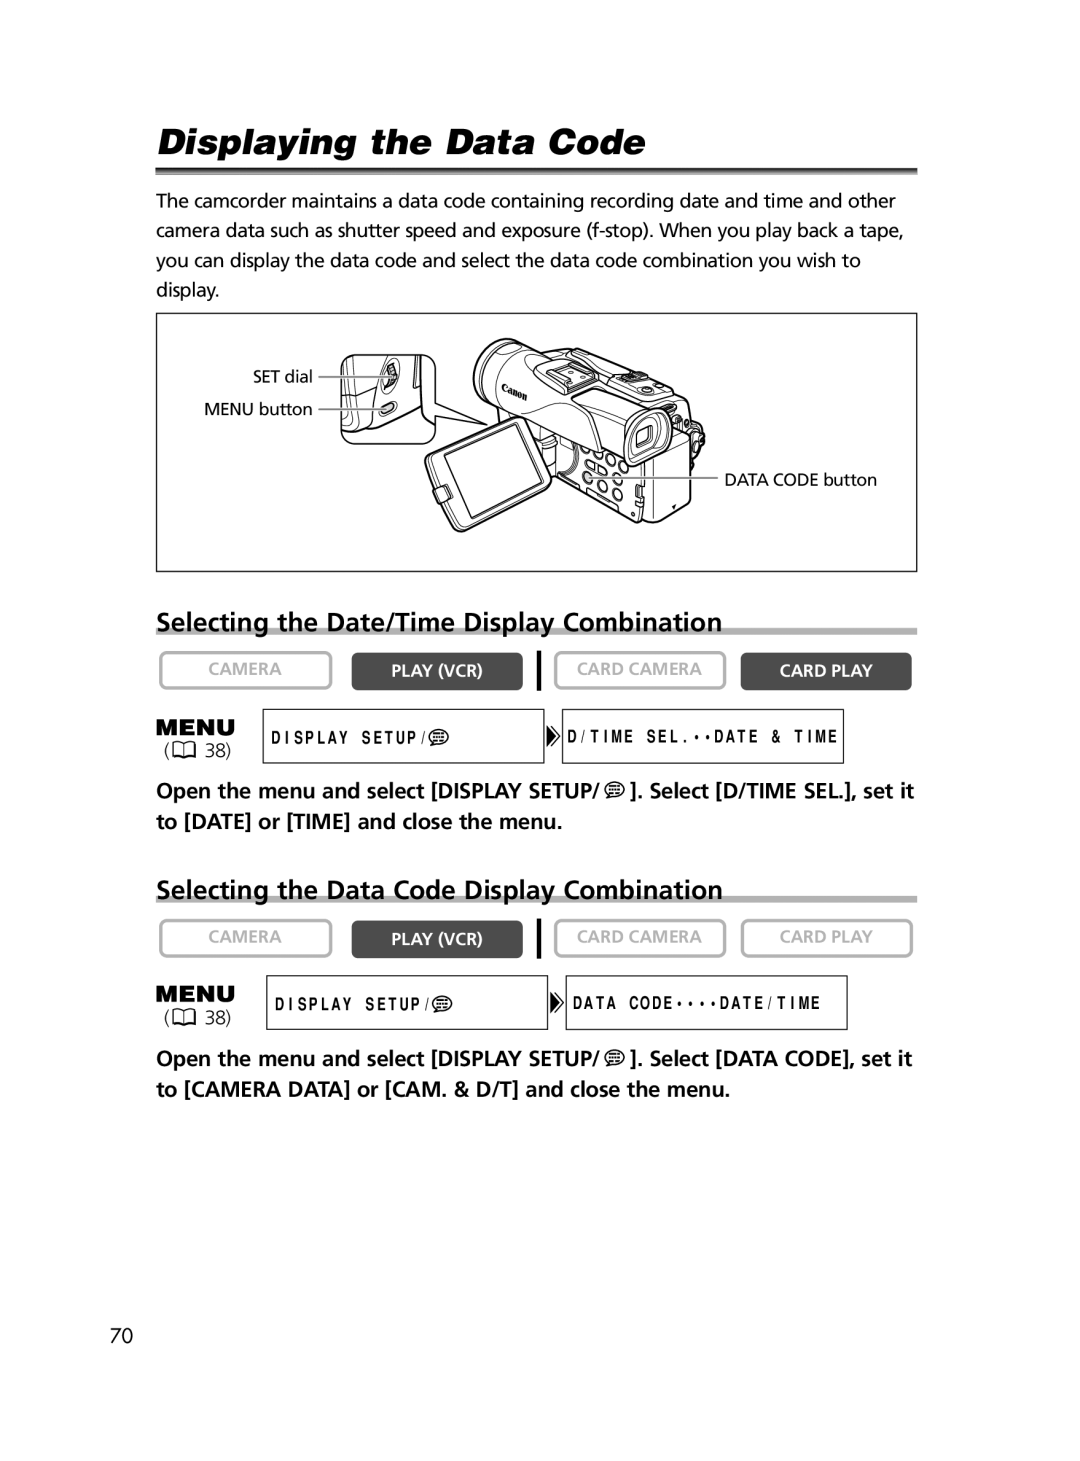 Canon 60, 65 instruction manual Displaying the Data Code, Selecting the Date/Time Display Combination 